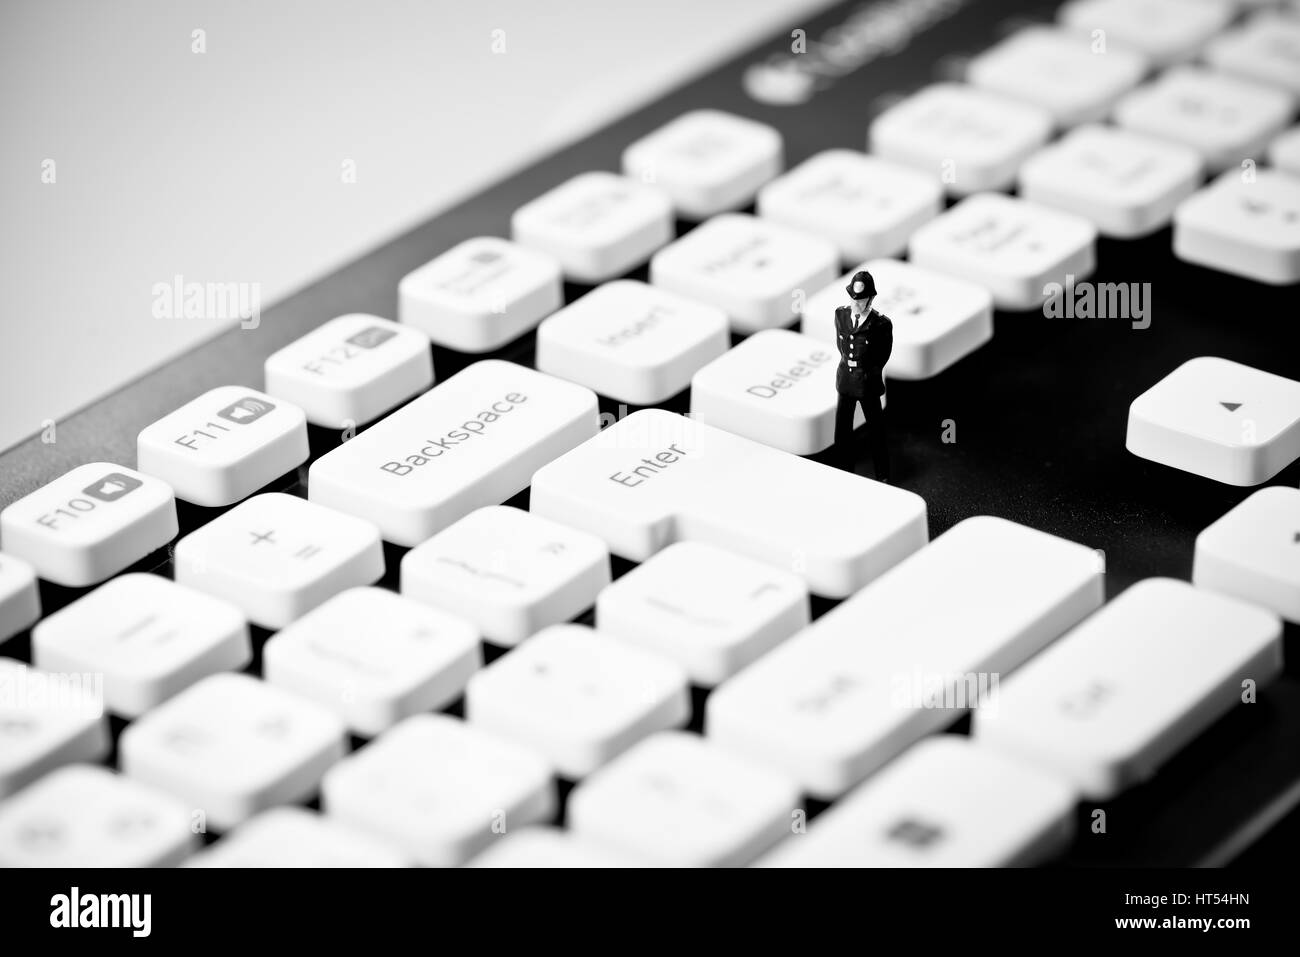 Miniature Police officer on top of computer keyboard. Internet piracy and criminality cpncept. Stock Photo